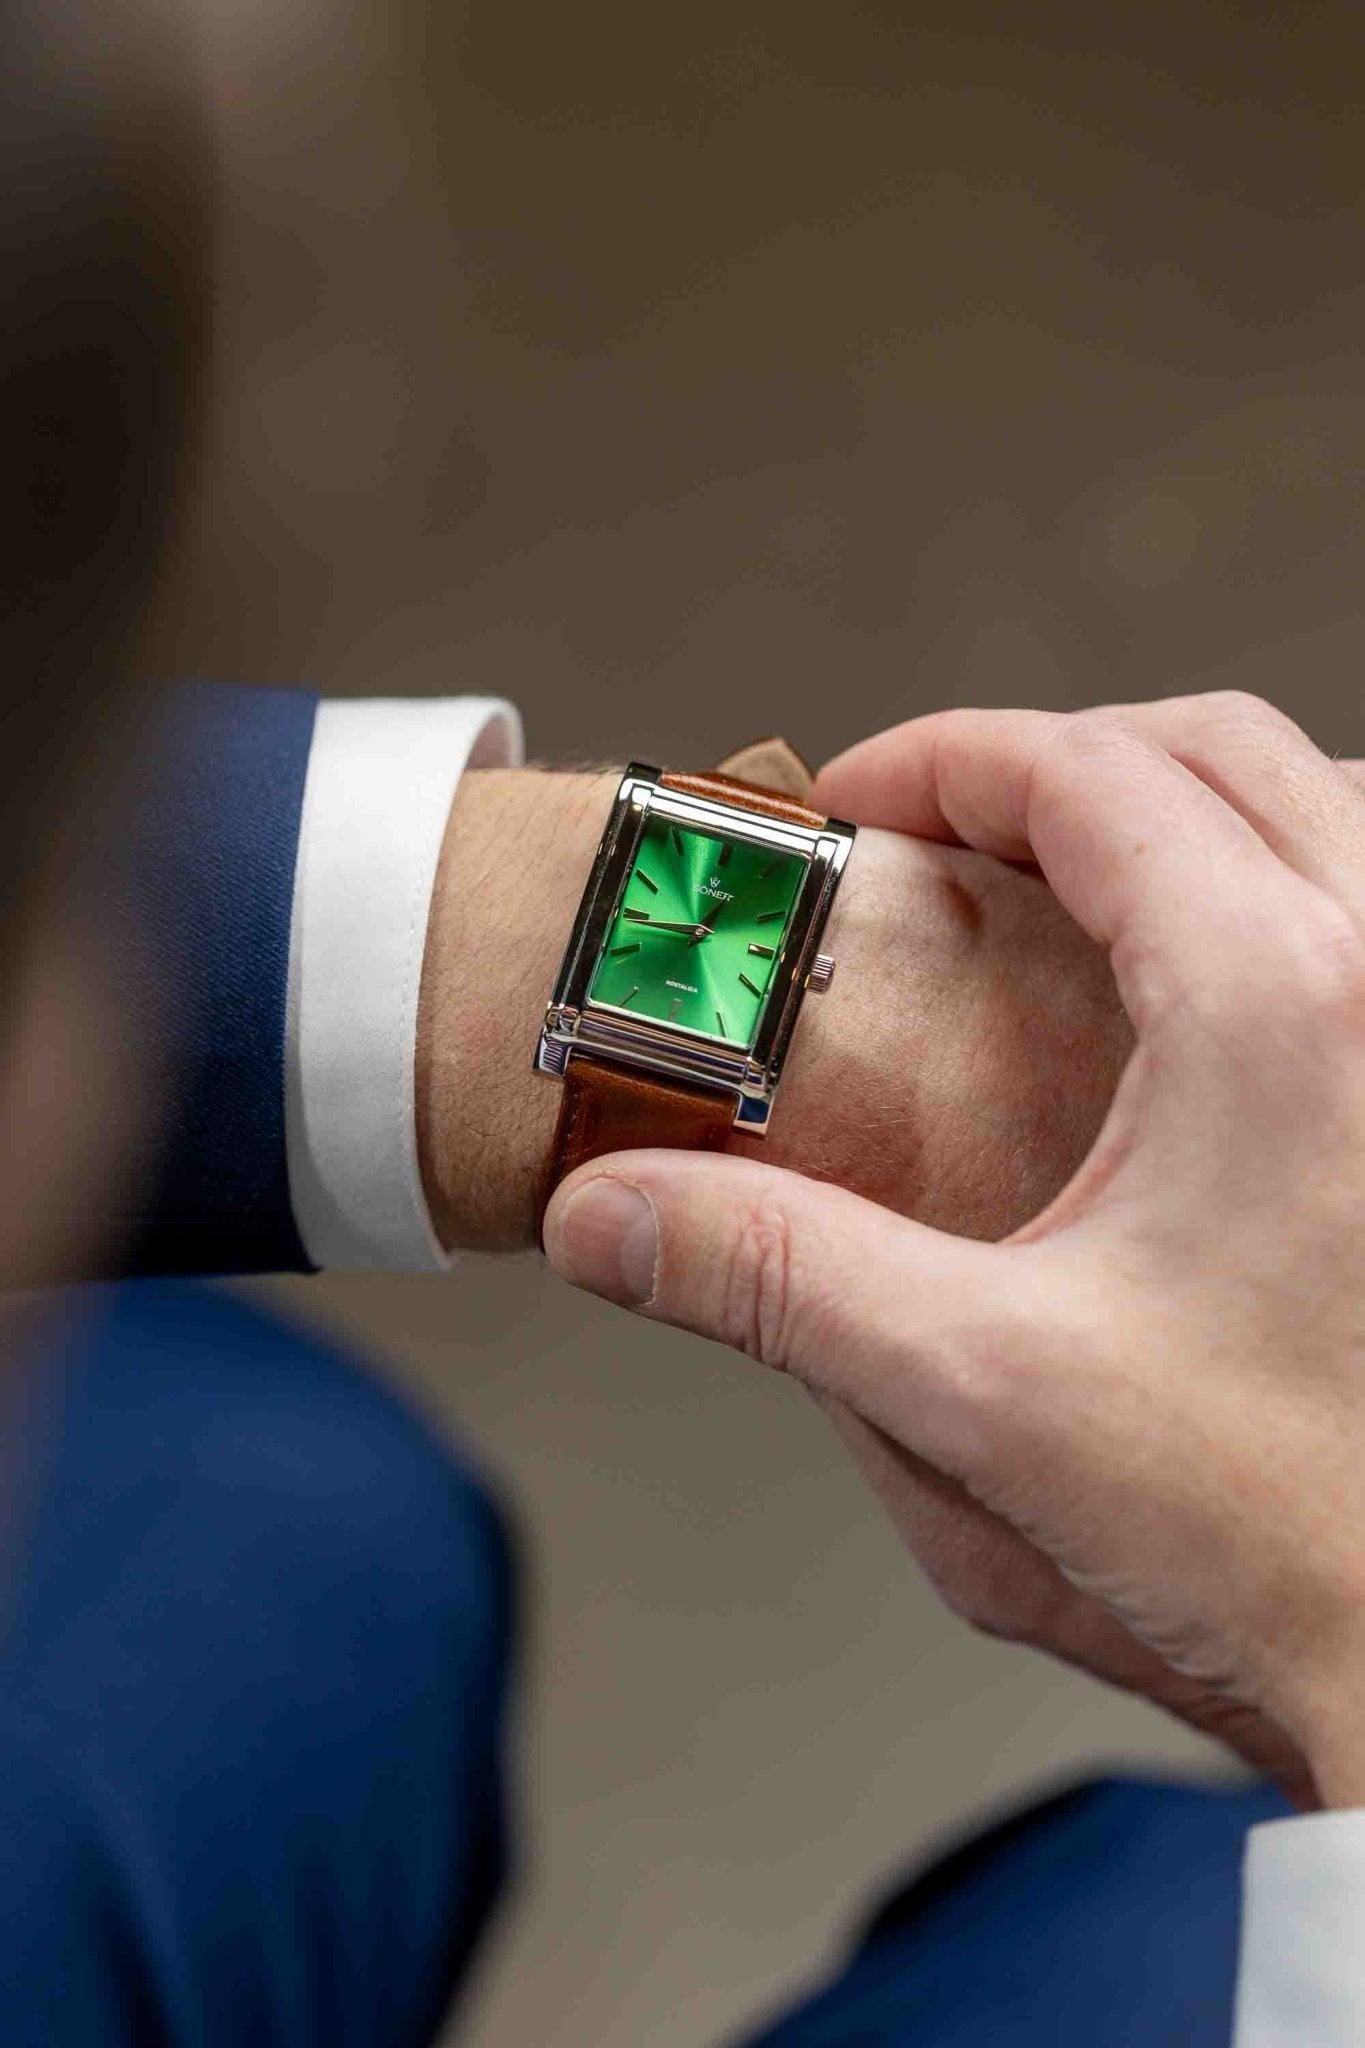 Square watch, Nostalgia New York with green dial - on male wrist checking the time